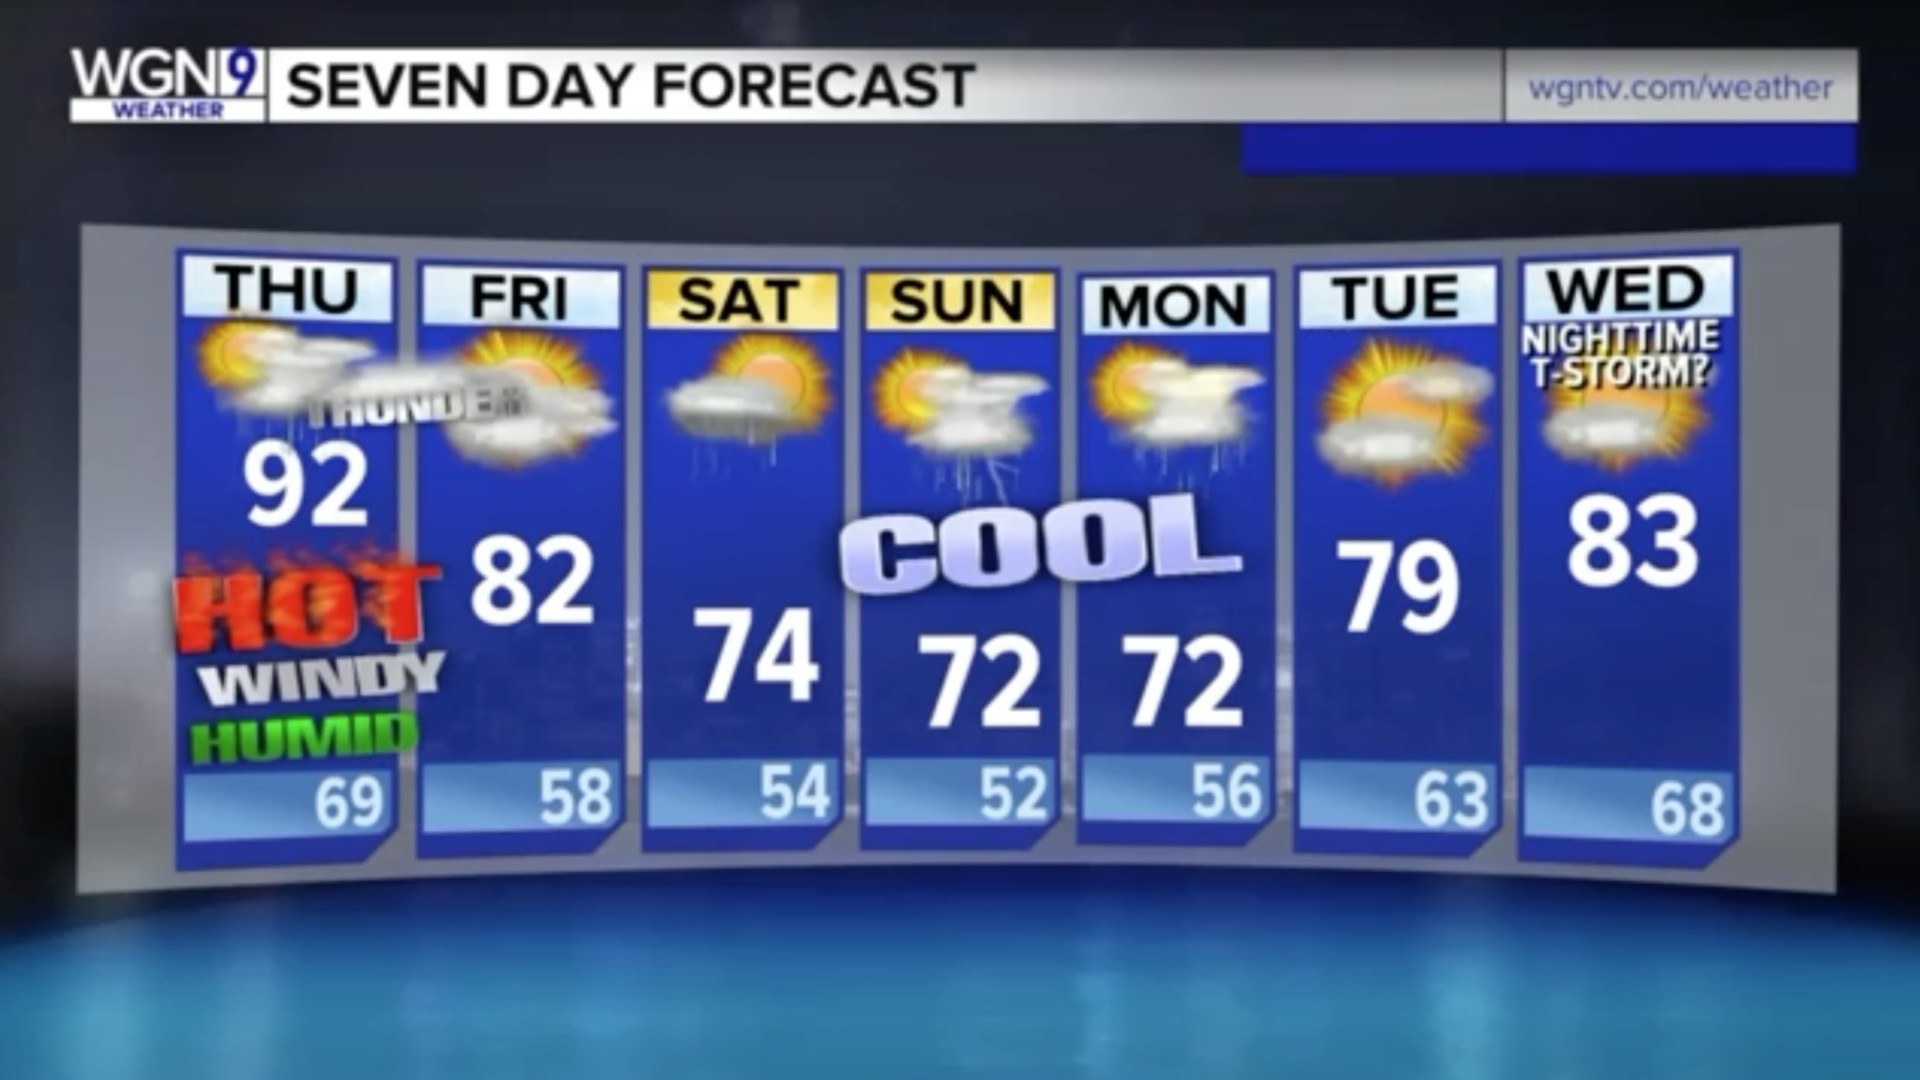 7-day WGN weather forecast for June 21, 2017 - Chicago Tribune